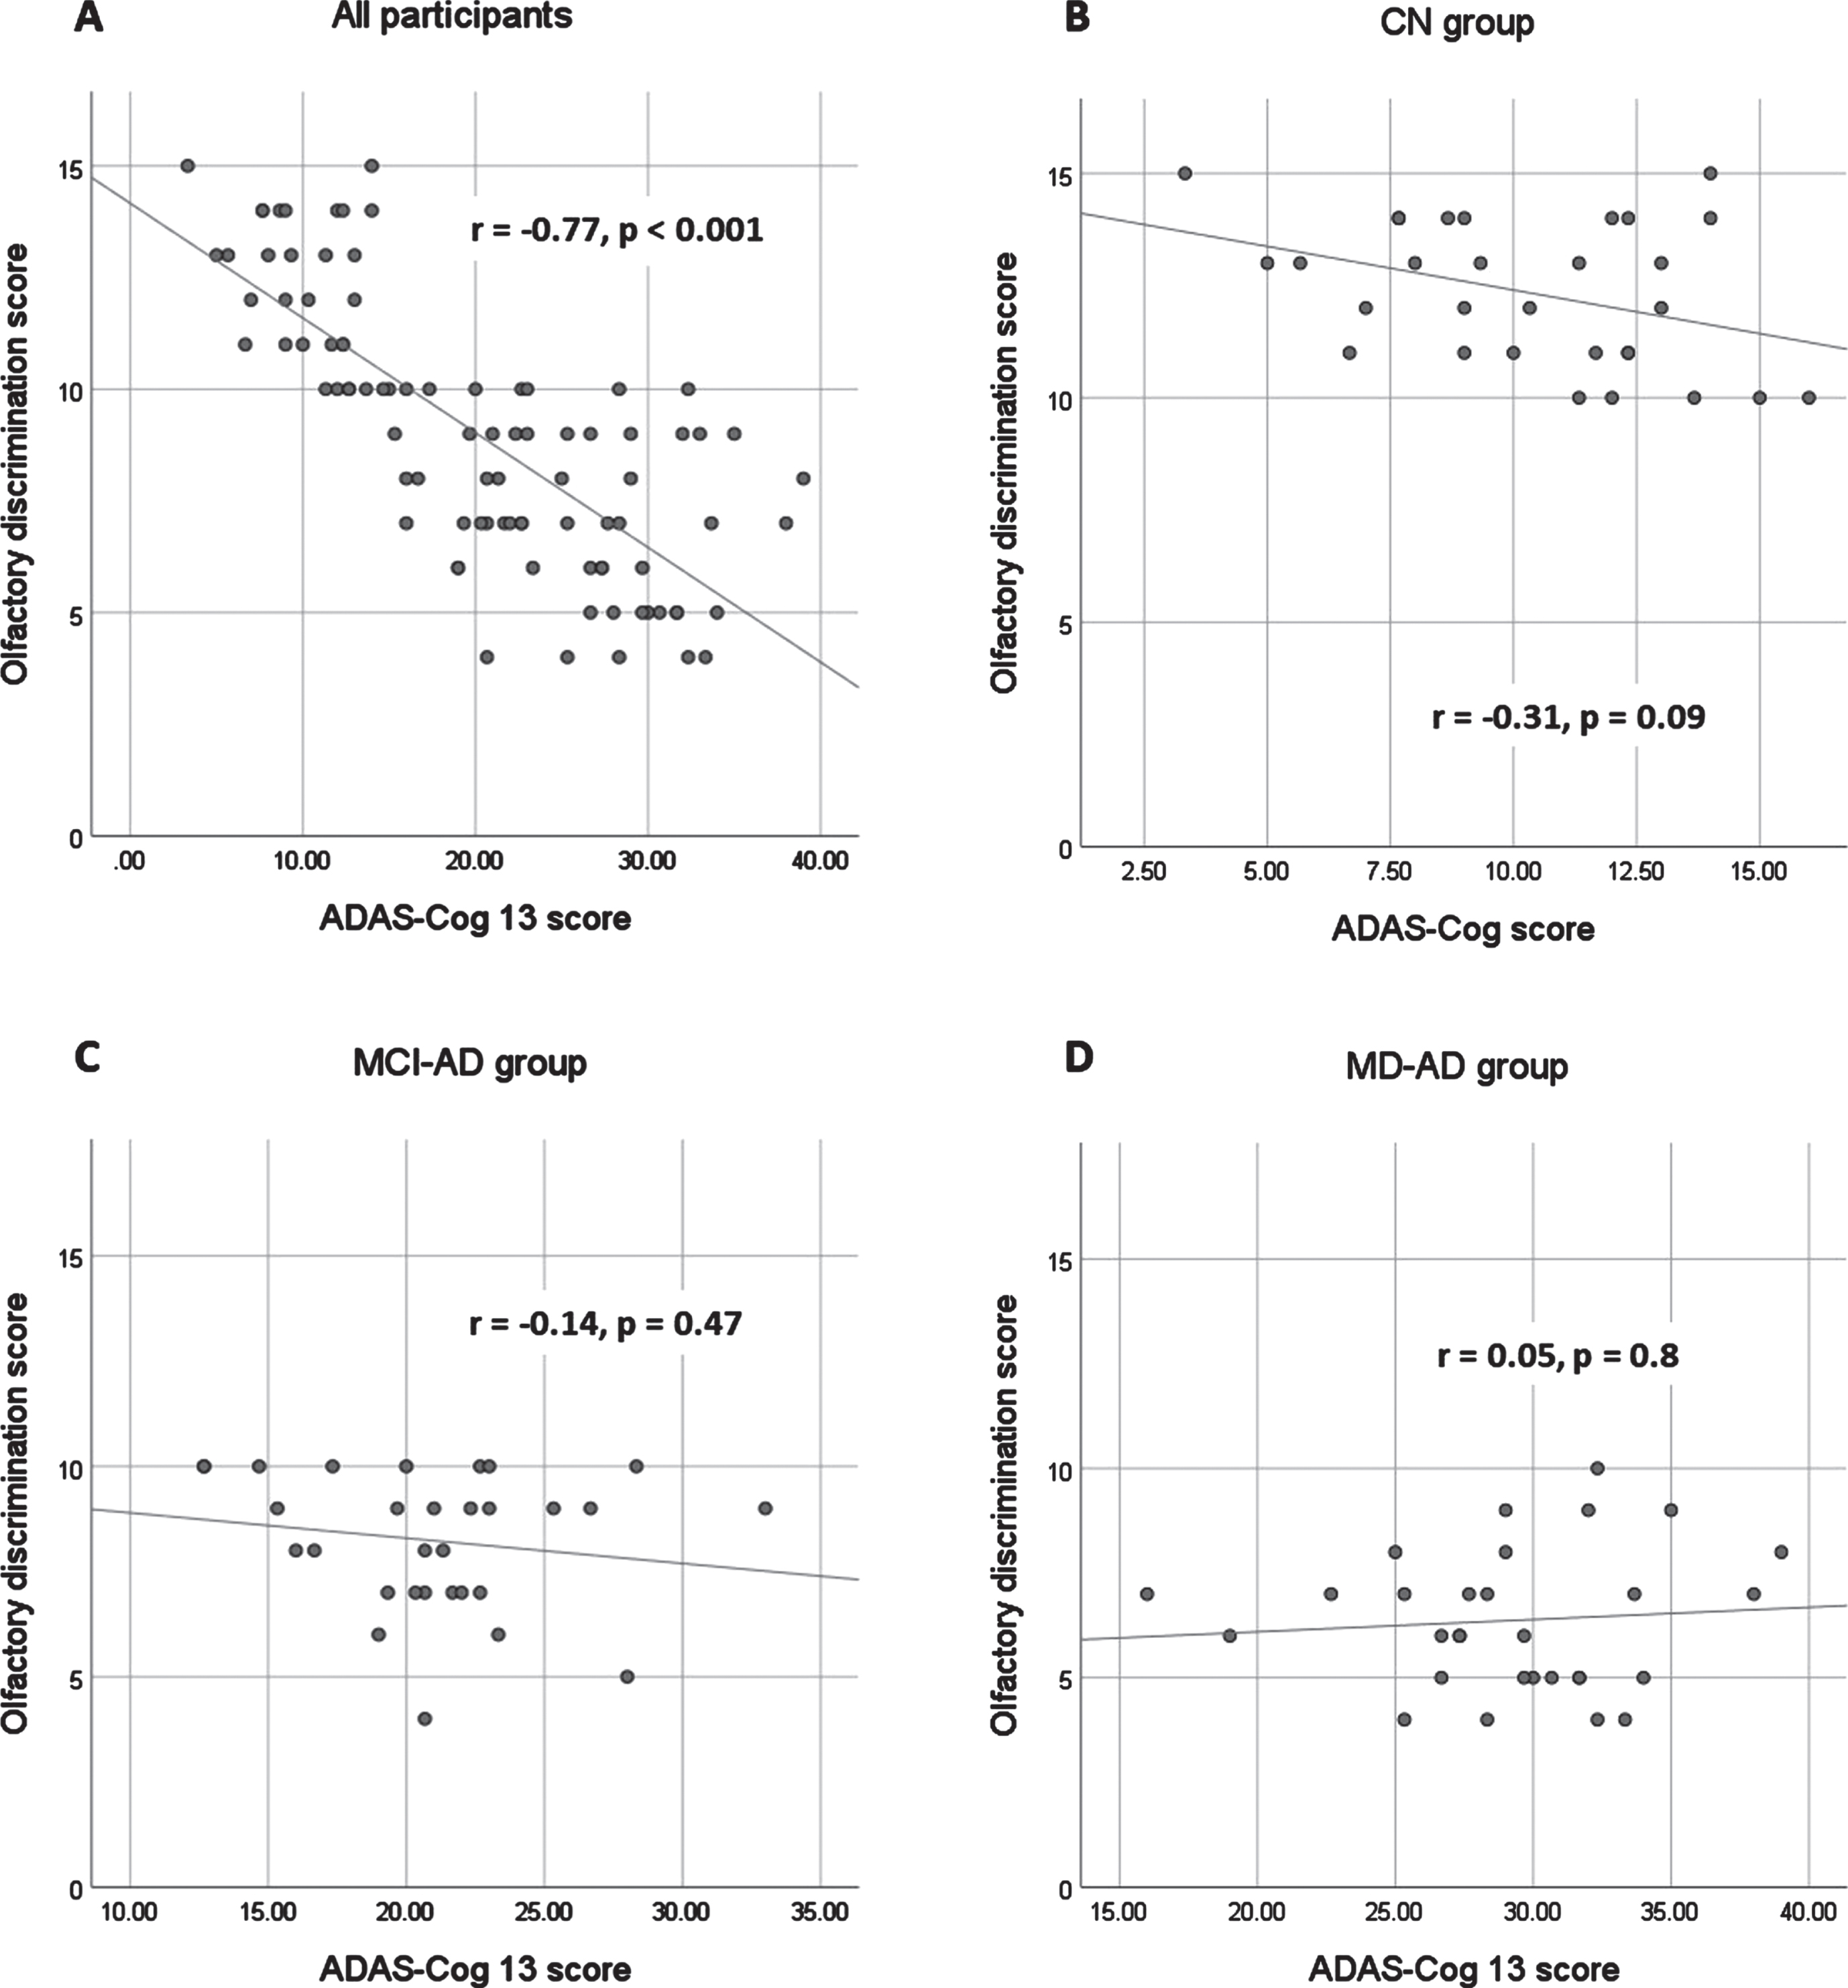 Relationship between olfactory discrimination scores and ADAS-Cog 13 results. ADAS-Cog 13, Alzheimer’s Disease Assessment Scale-Cognitive Subscale, version 13. MD-AD, mild dementia due to Alzheimer’s disease; MCI-AD, mild cognitive impairment due to Alzheimer’s disease; CN, normal cognition.